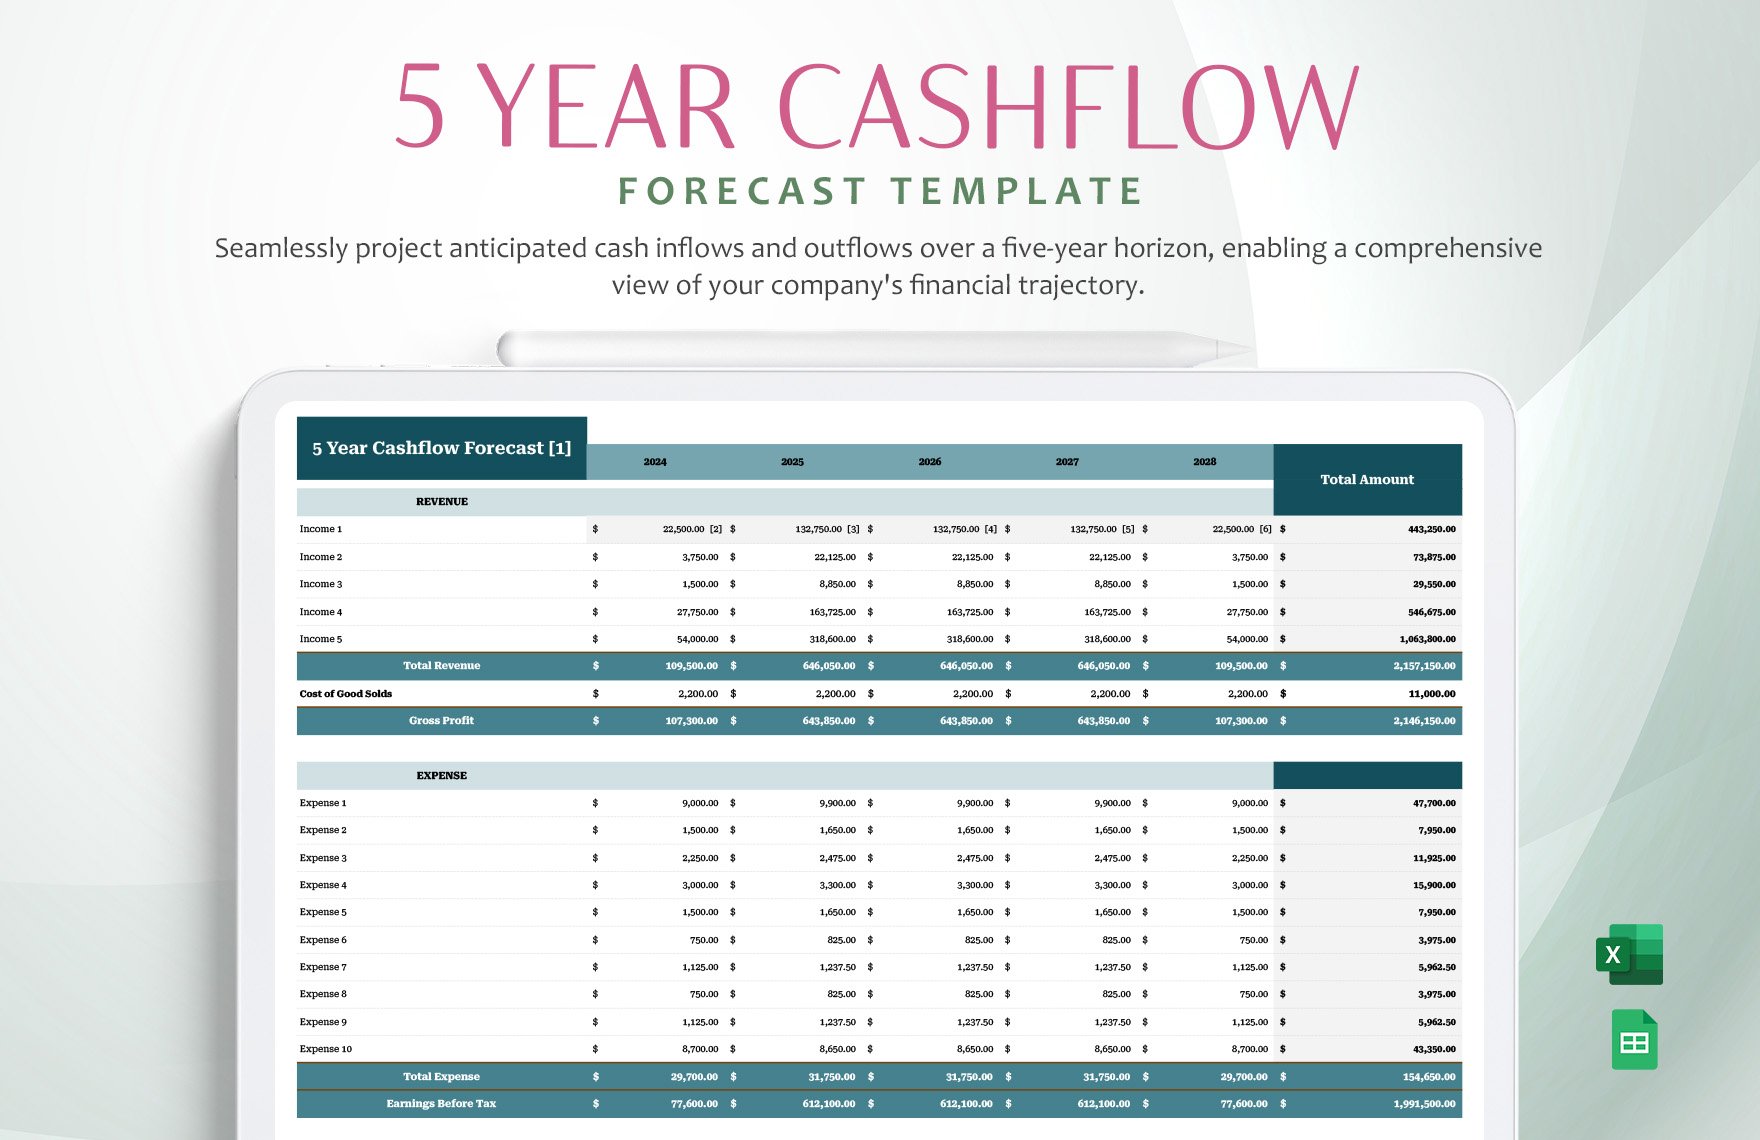 5 Year Cashflow Forecast Template in Excel, Google Sheets